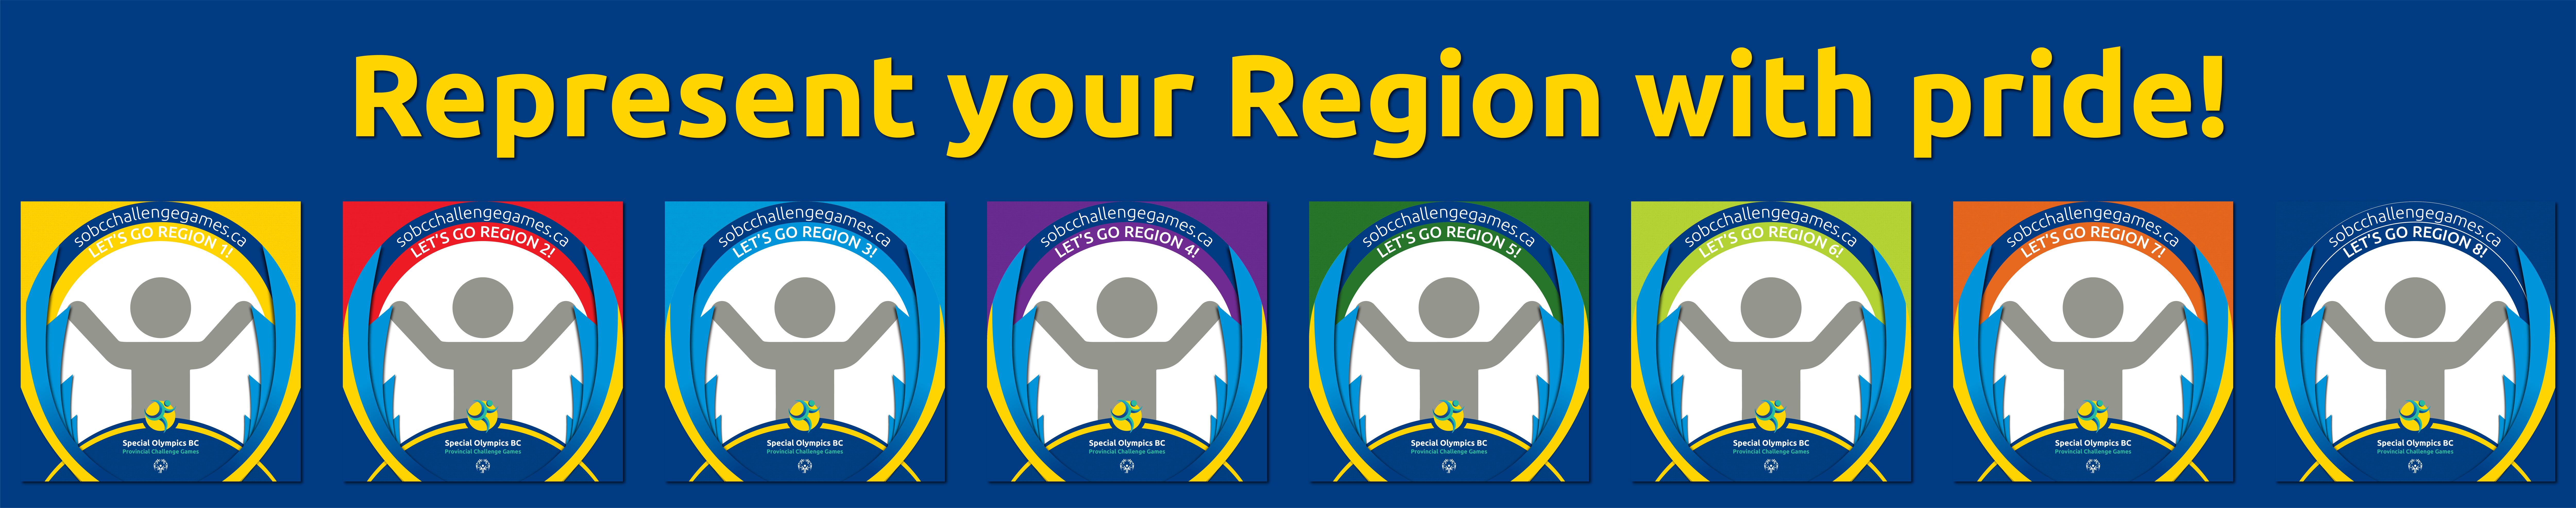 Represent your Region with pride with these fun Facebook profile picture frames!